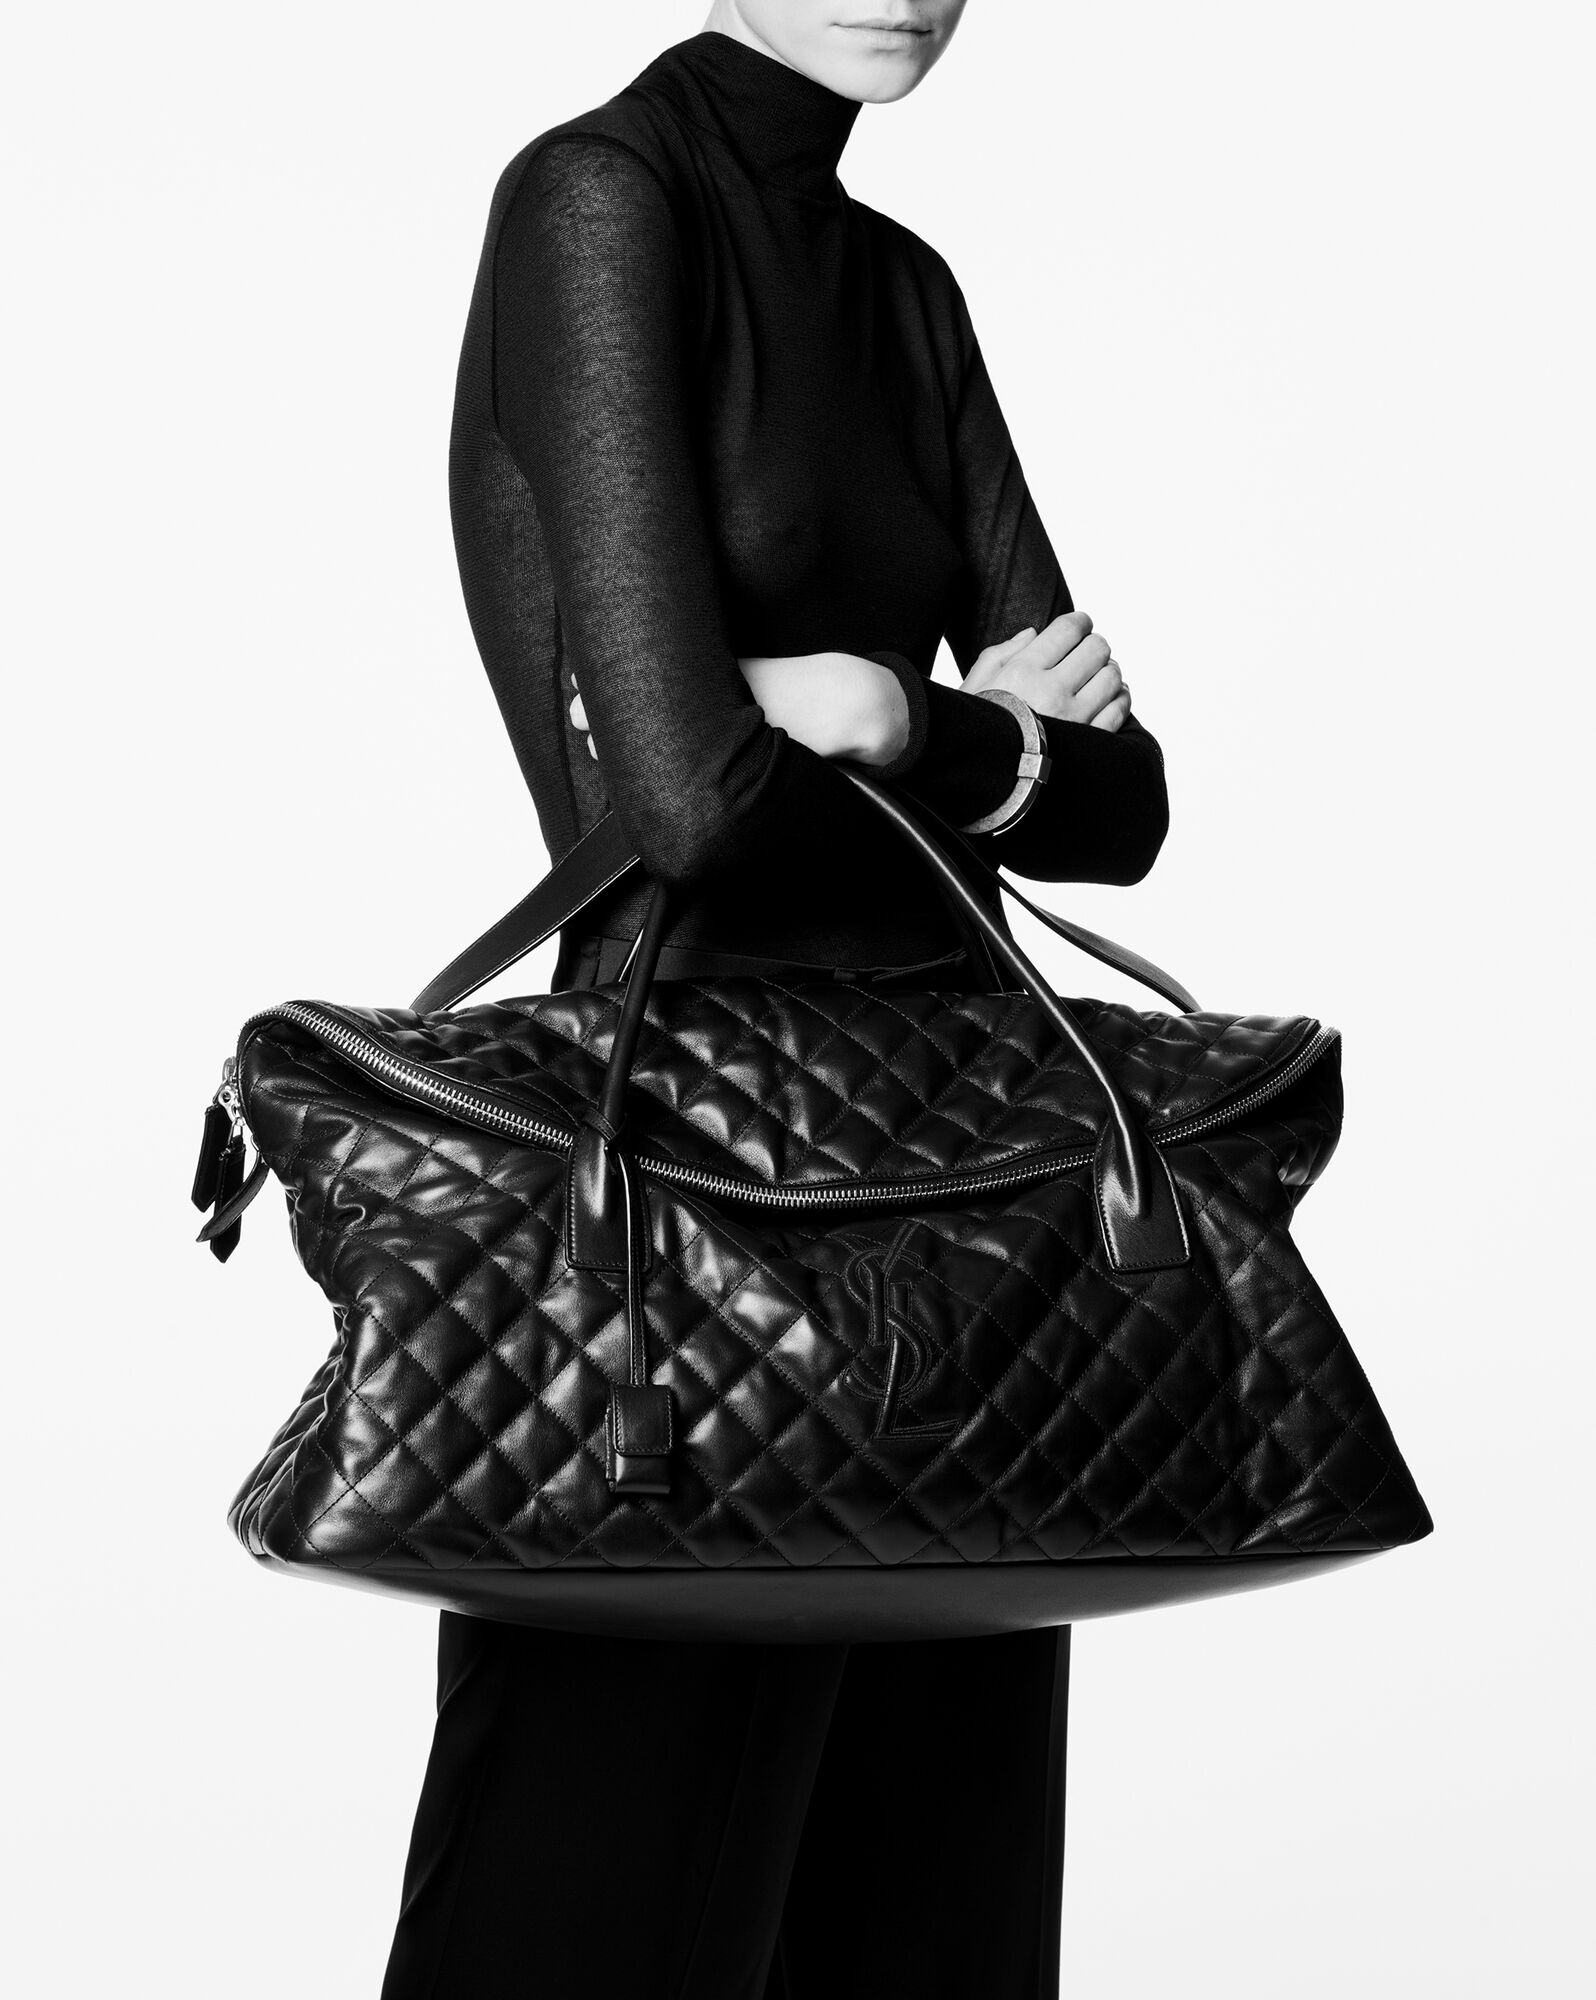 TÚI XÁCH DU LỊCH YSL ES GIANT TRAVEL BAG IN QUILTED LEATHER 8